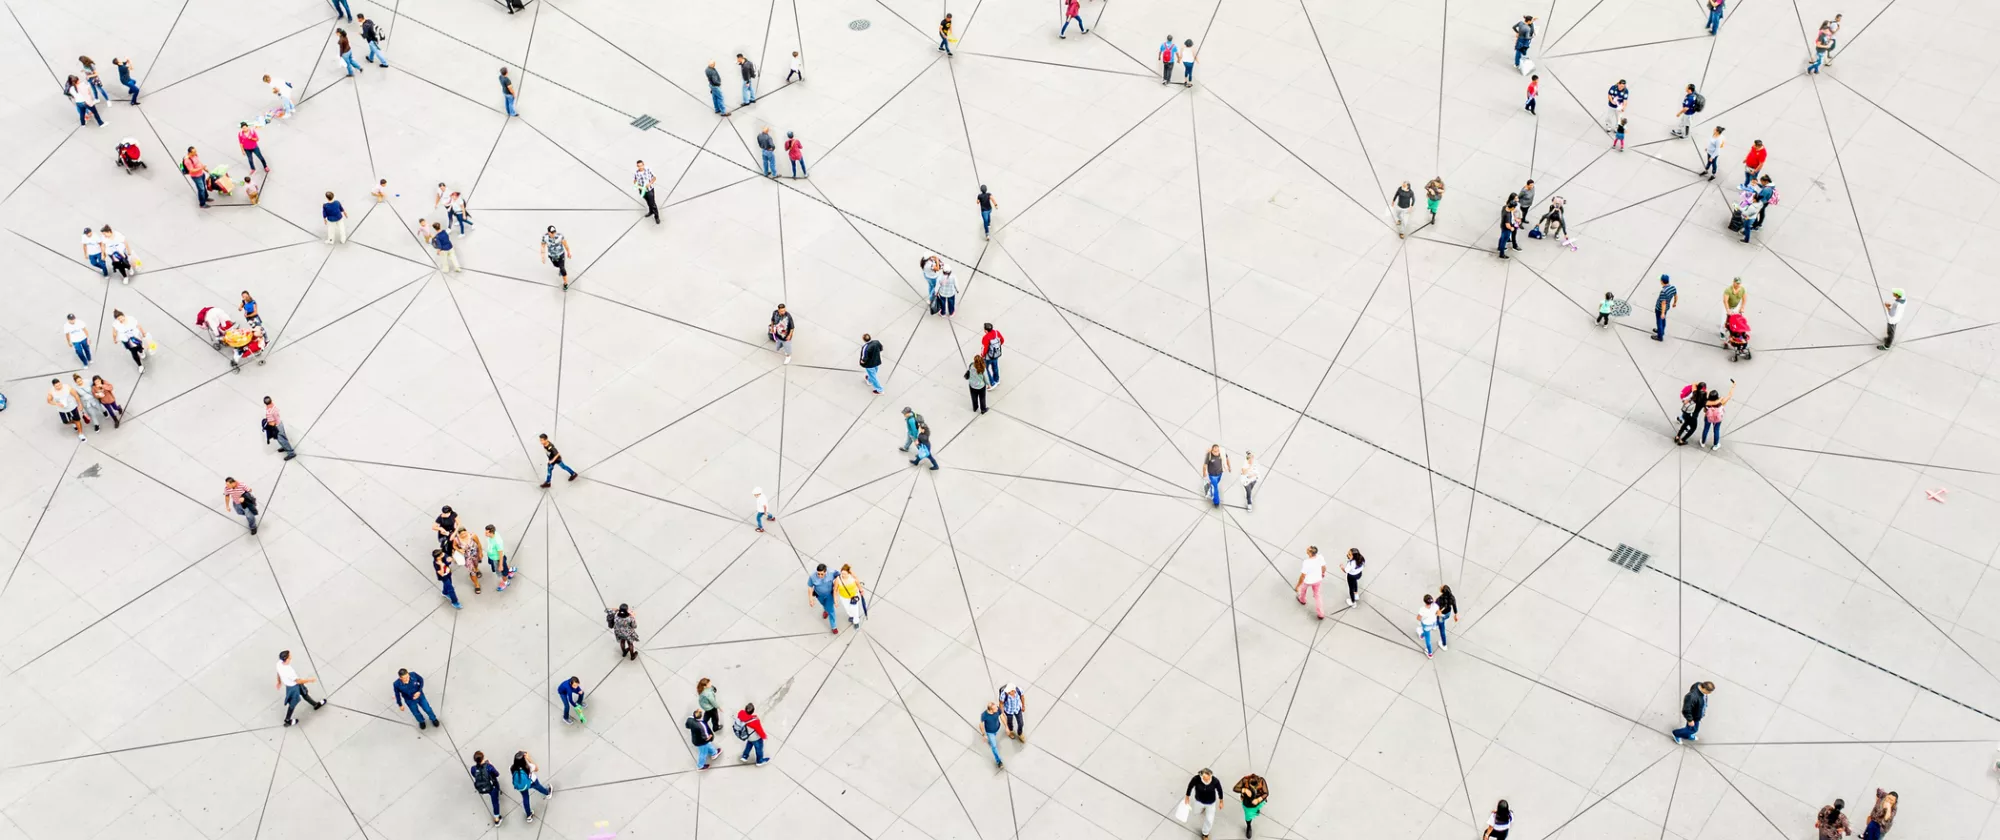 Illustration of an aerial view of people connected by threads